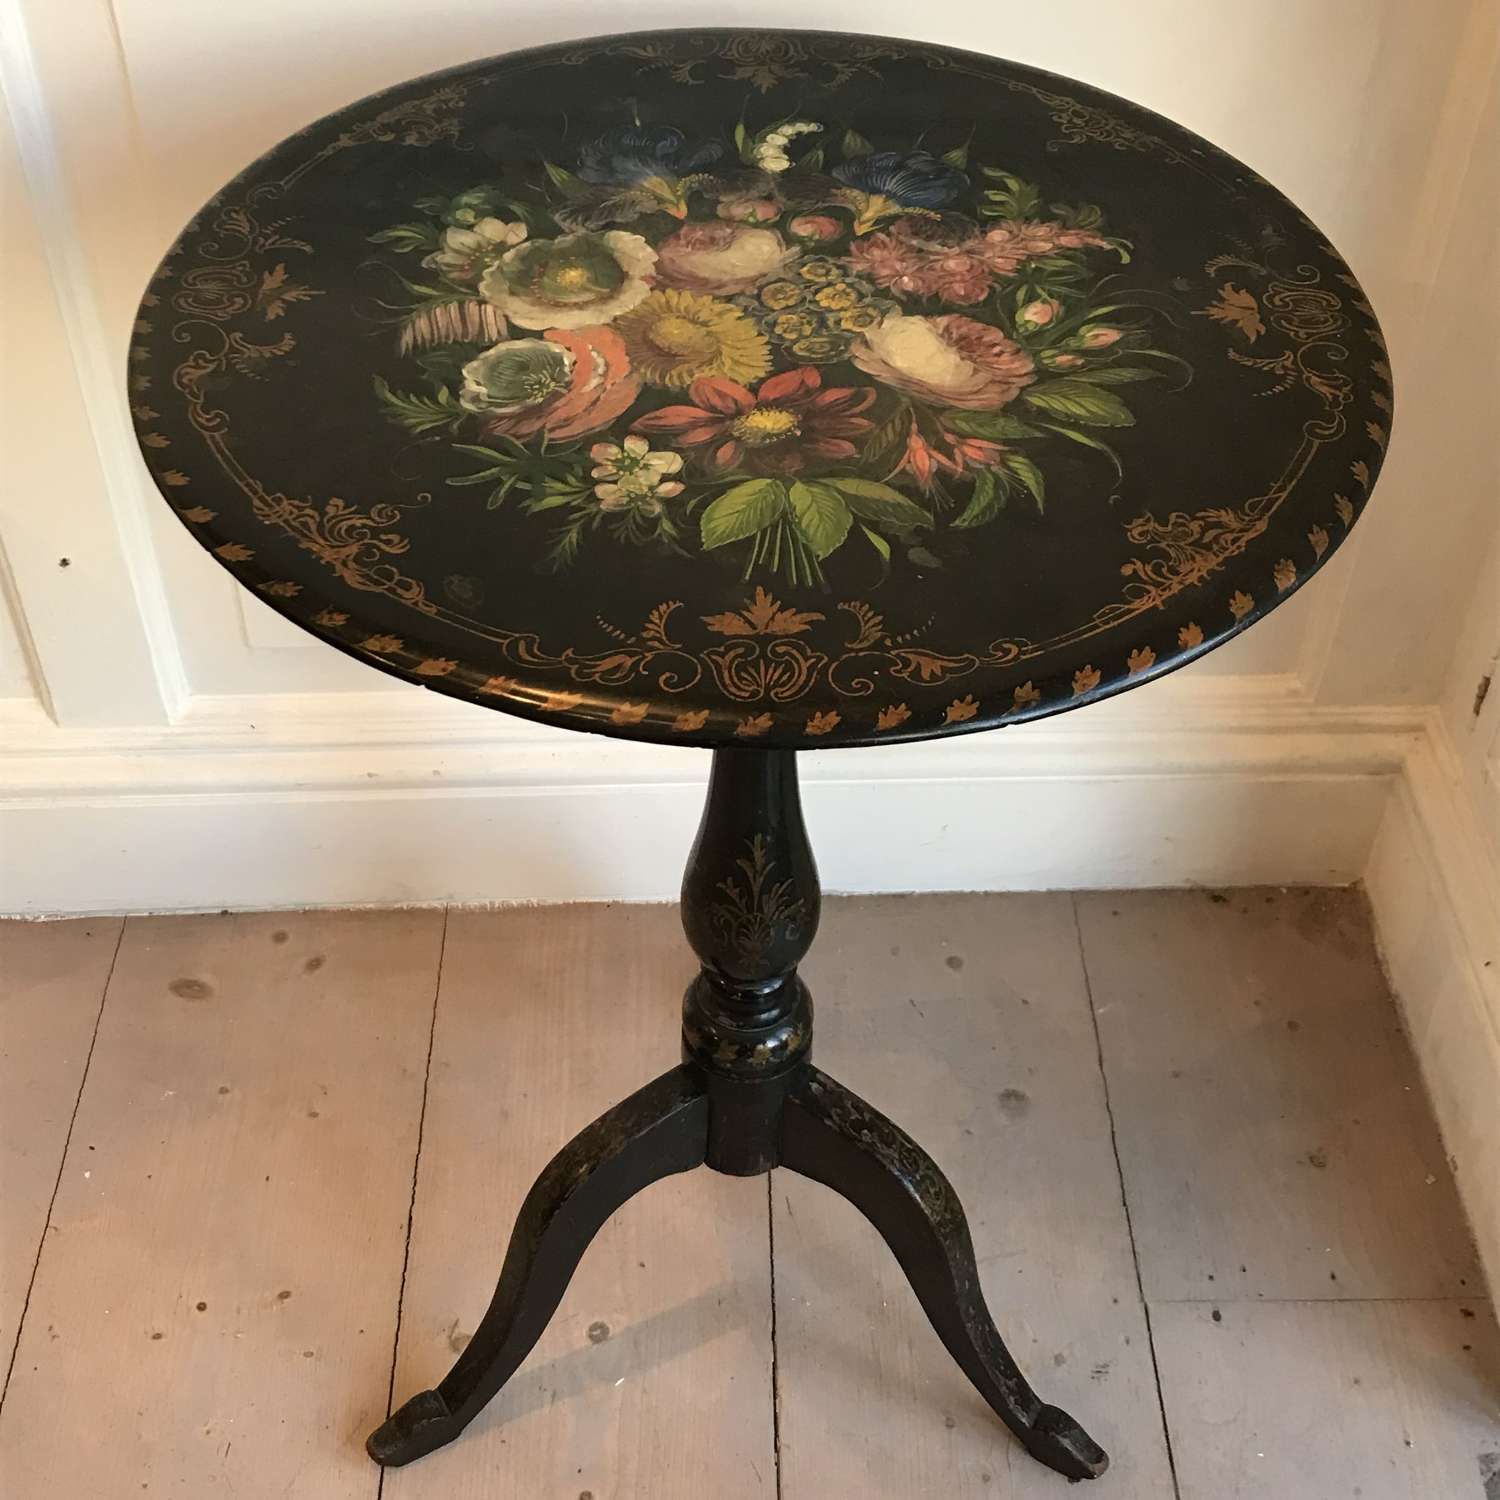 Rare 19th century hand painted slate top pedestal table